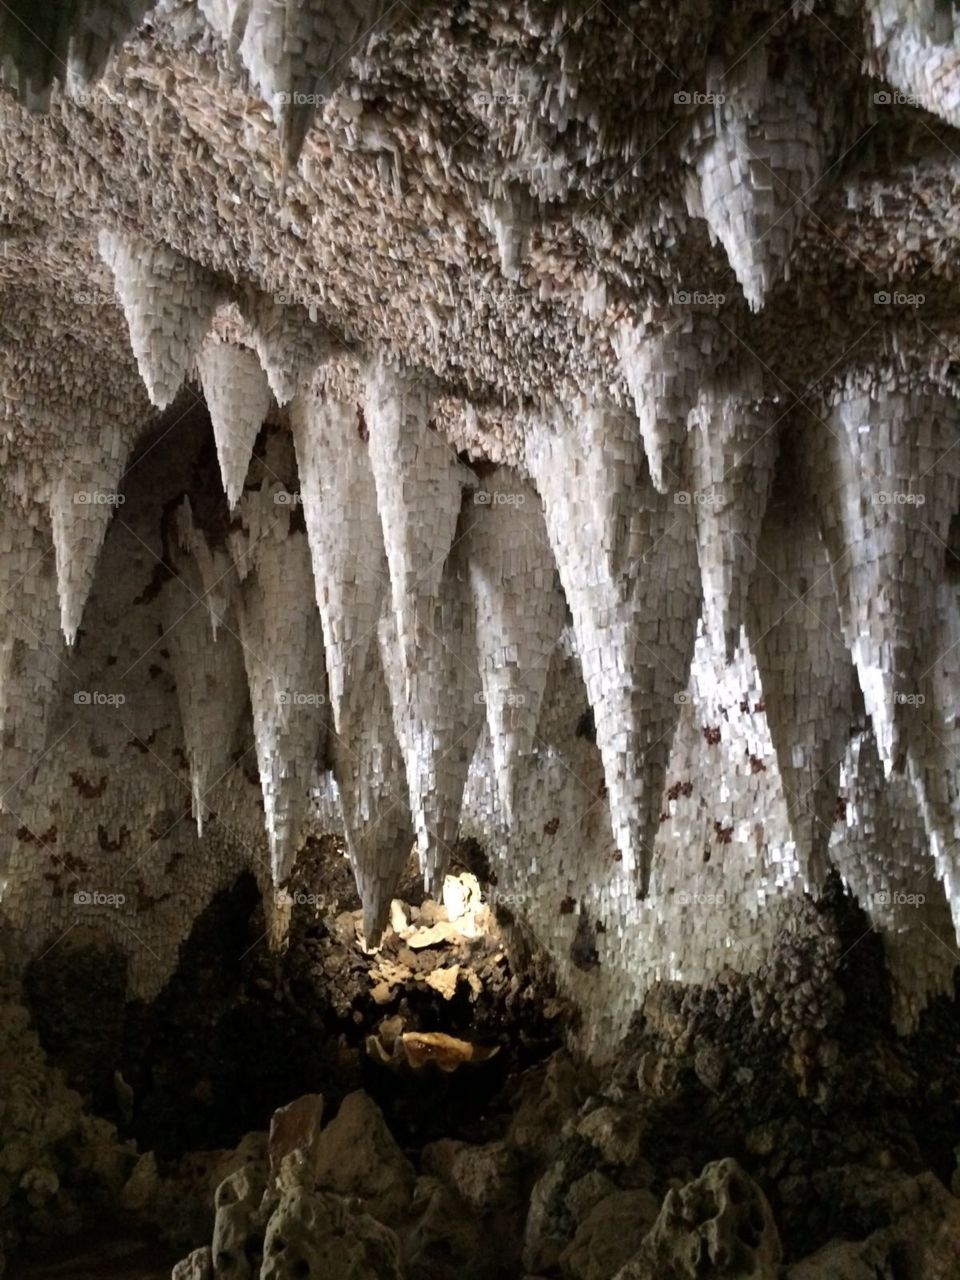 Stalactites in the grottos of England